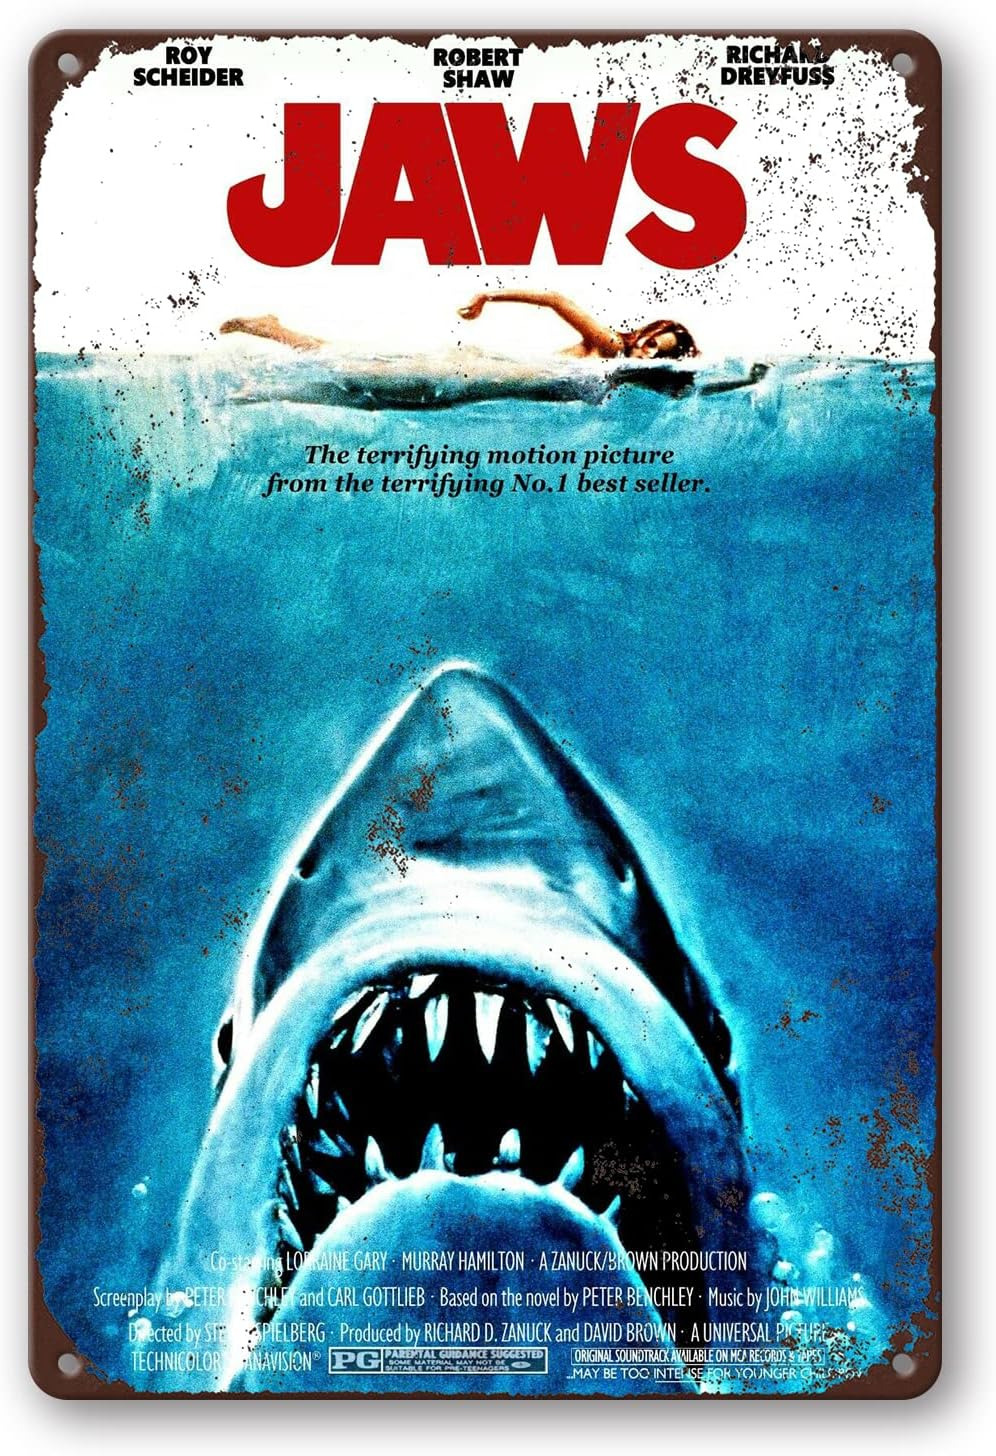 NEW 1975 Jaws Movie Vintage Look Reproduction Tin Metal Sign 12X8 Inch